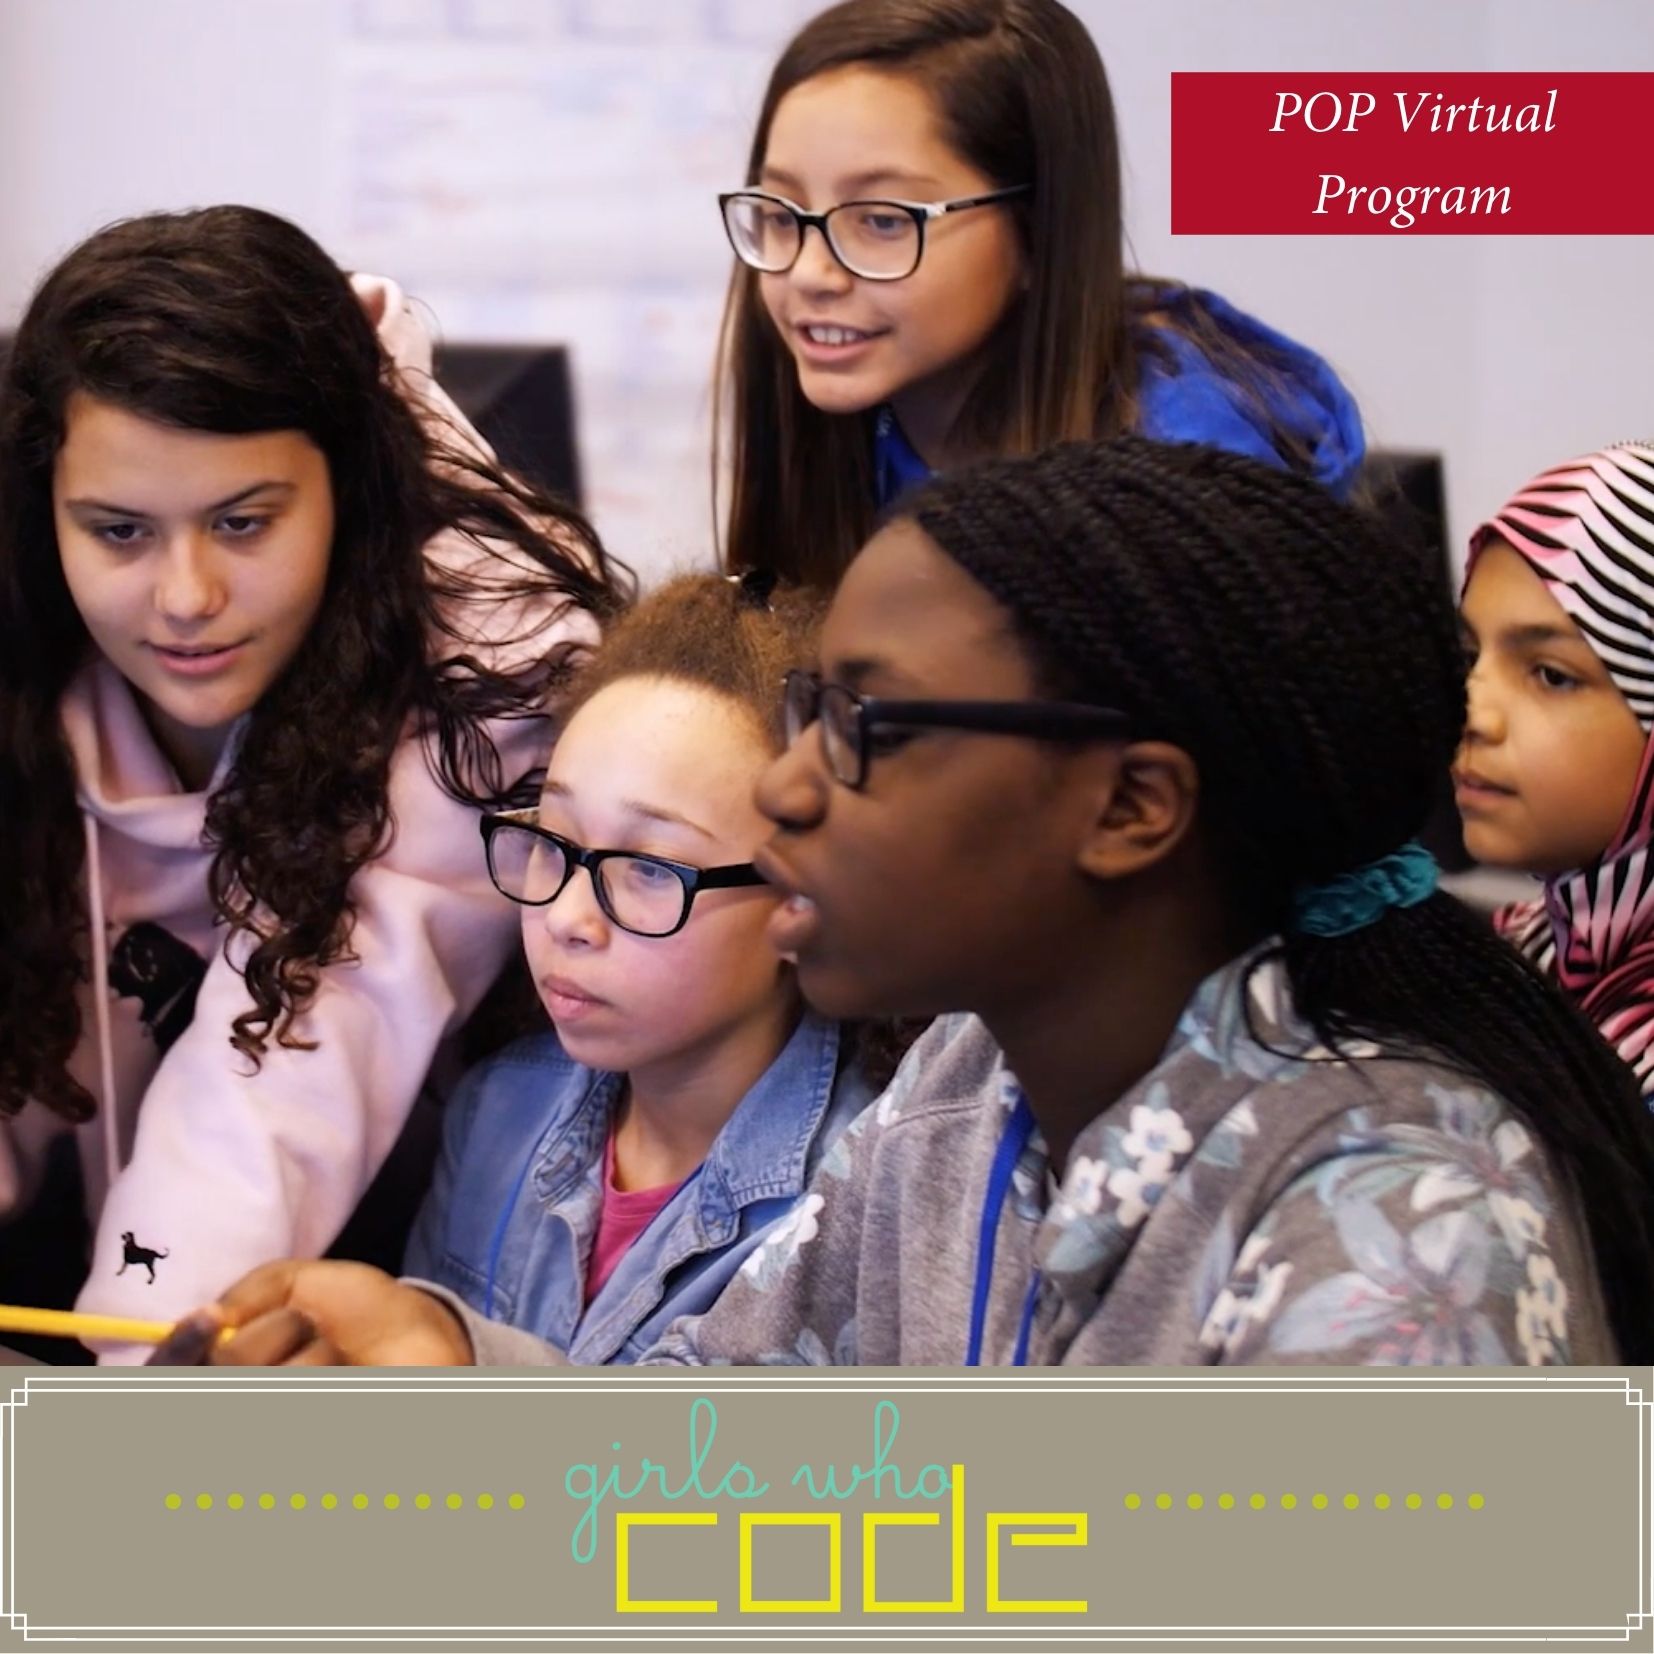 Girls learning coding at computer